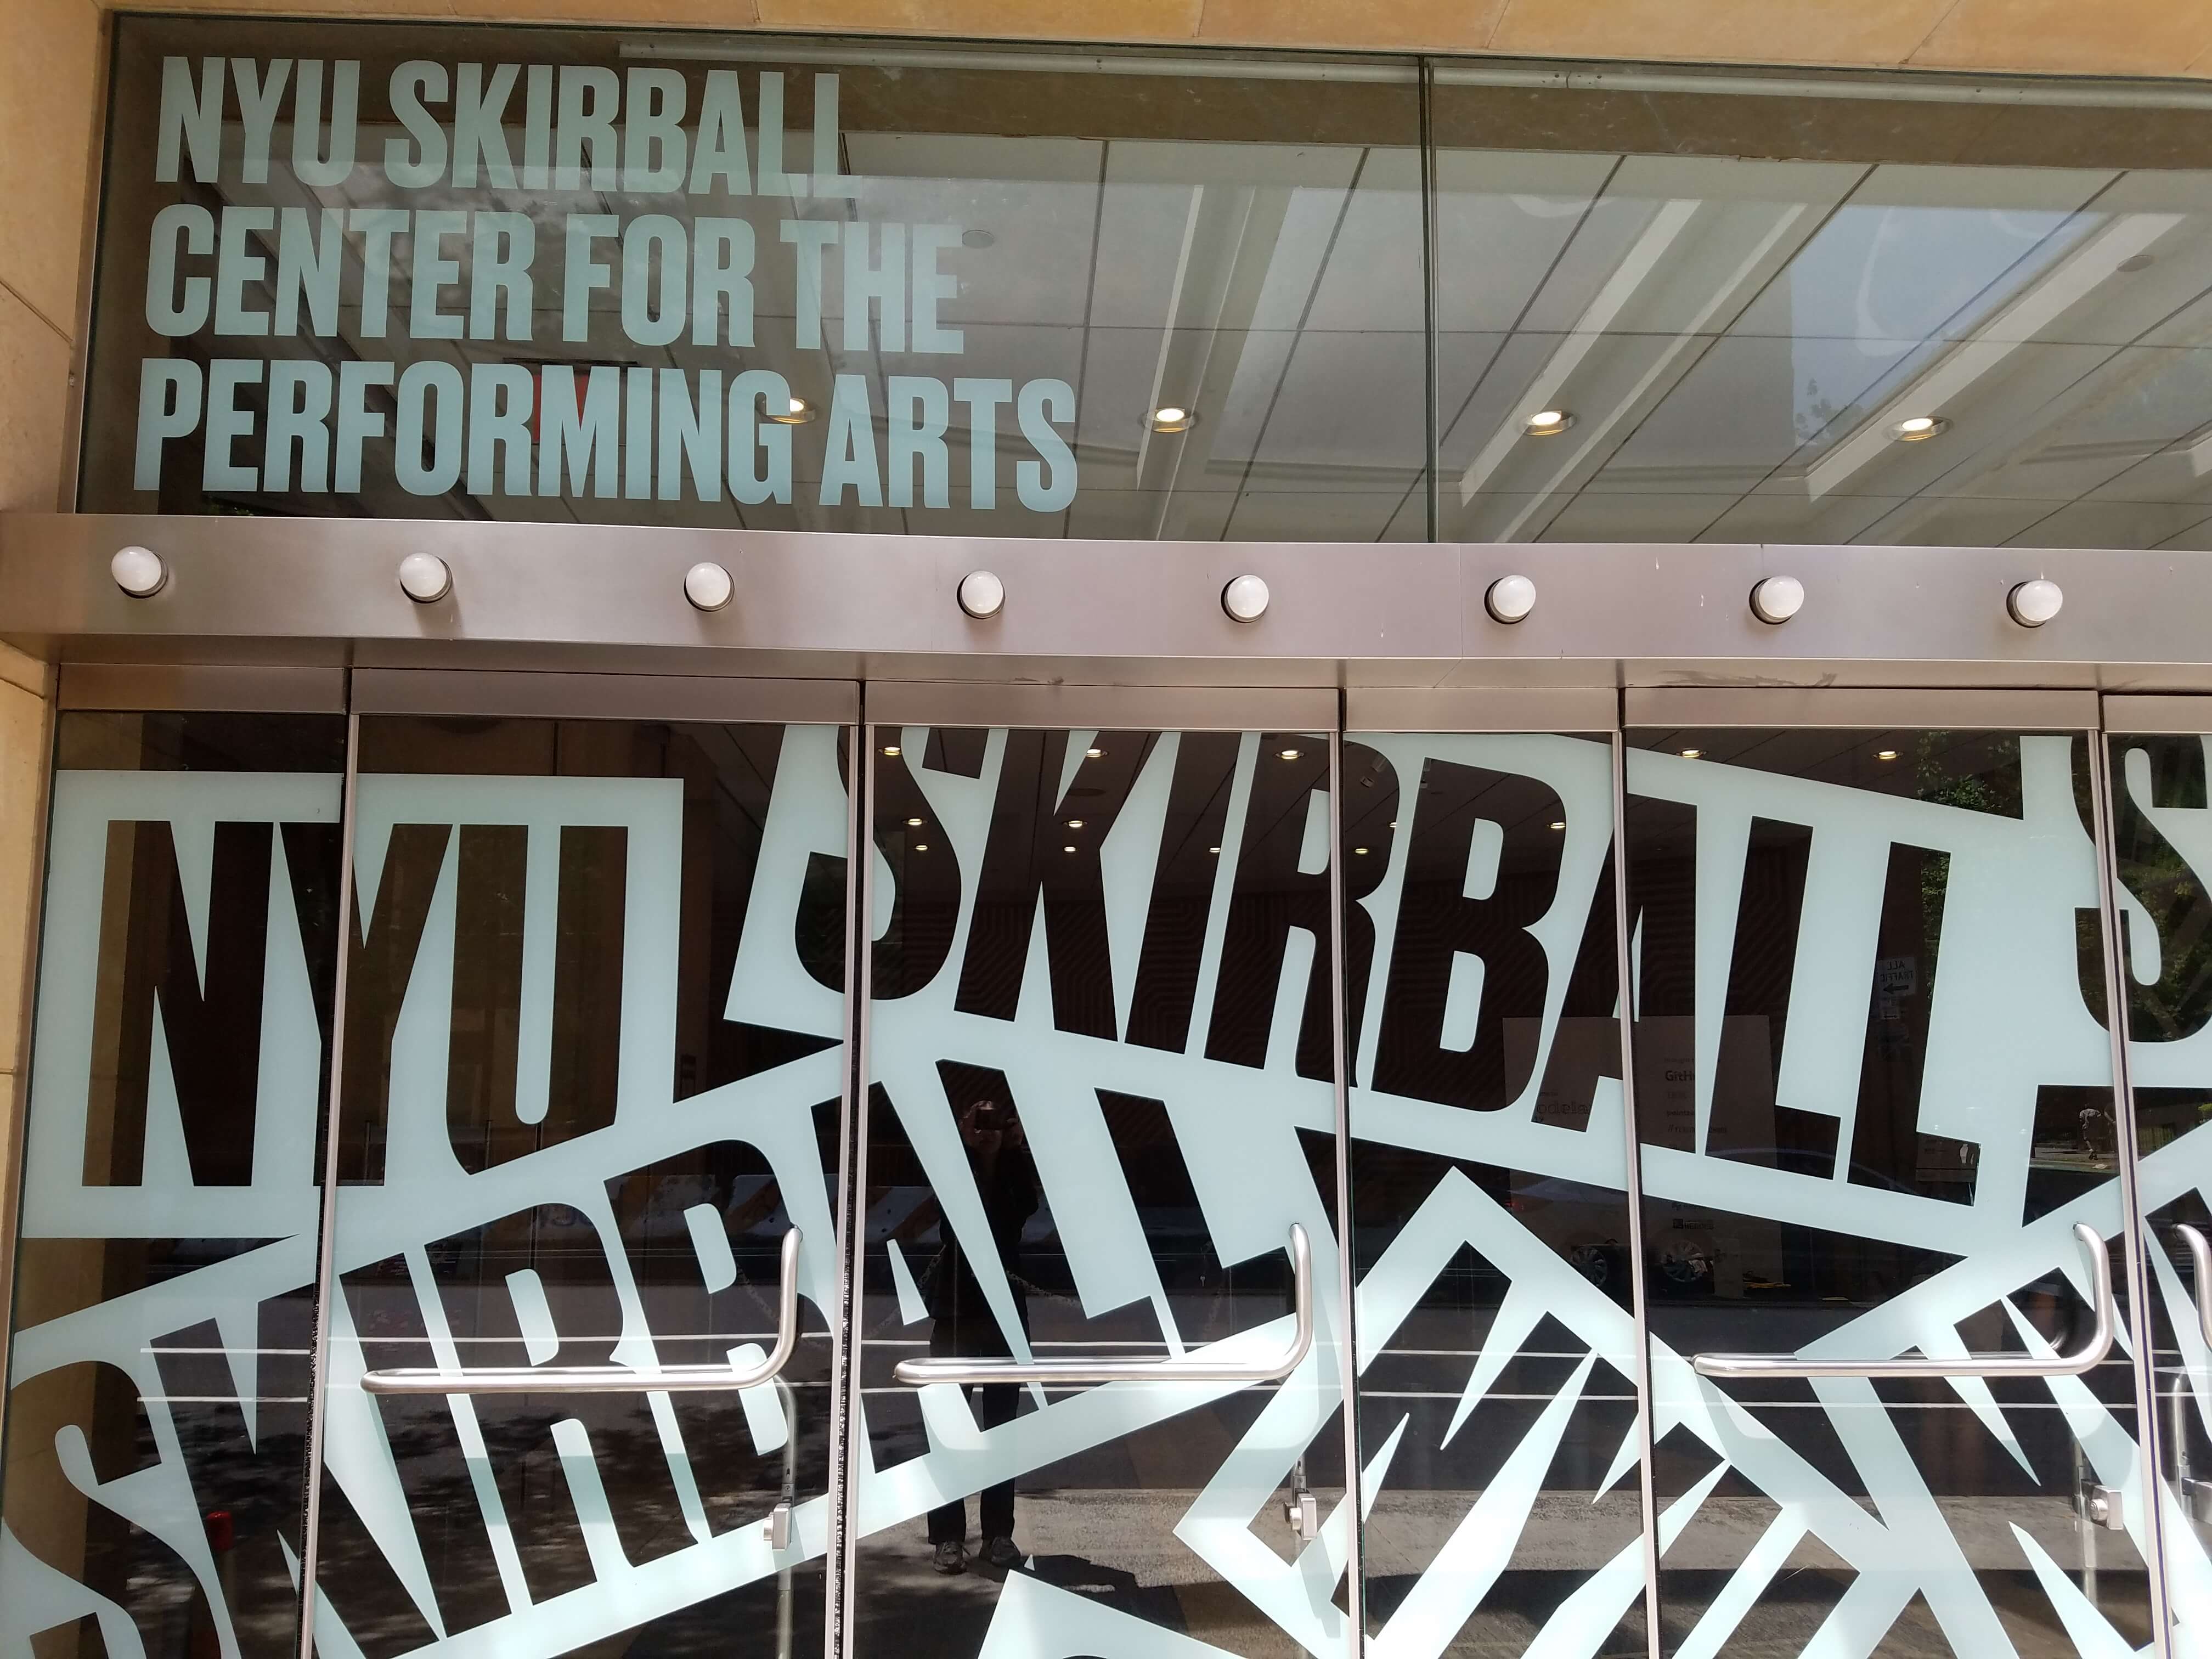 Entrance to Skirball Center for the Performing Arts